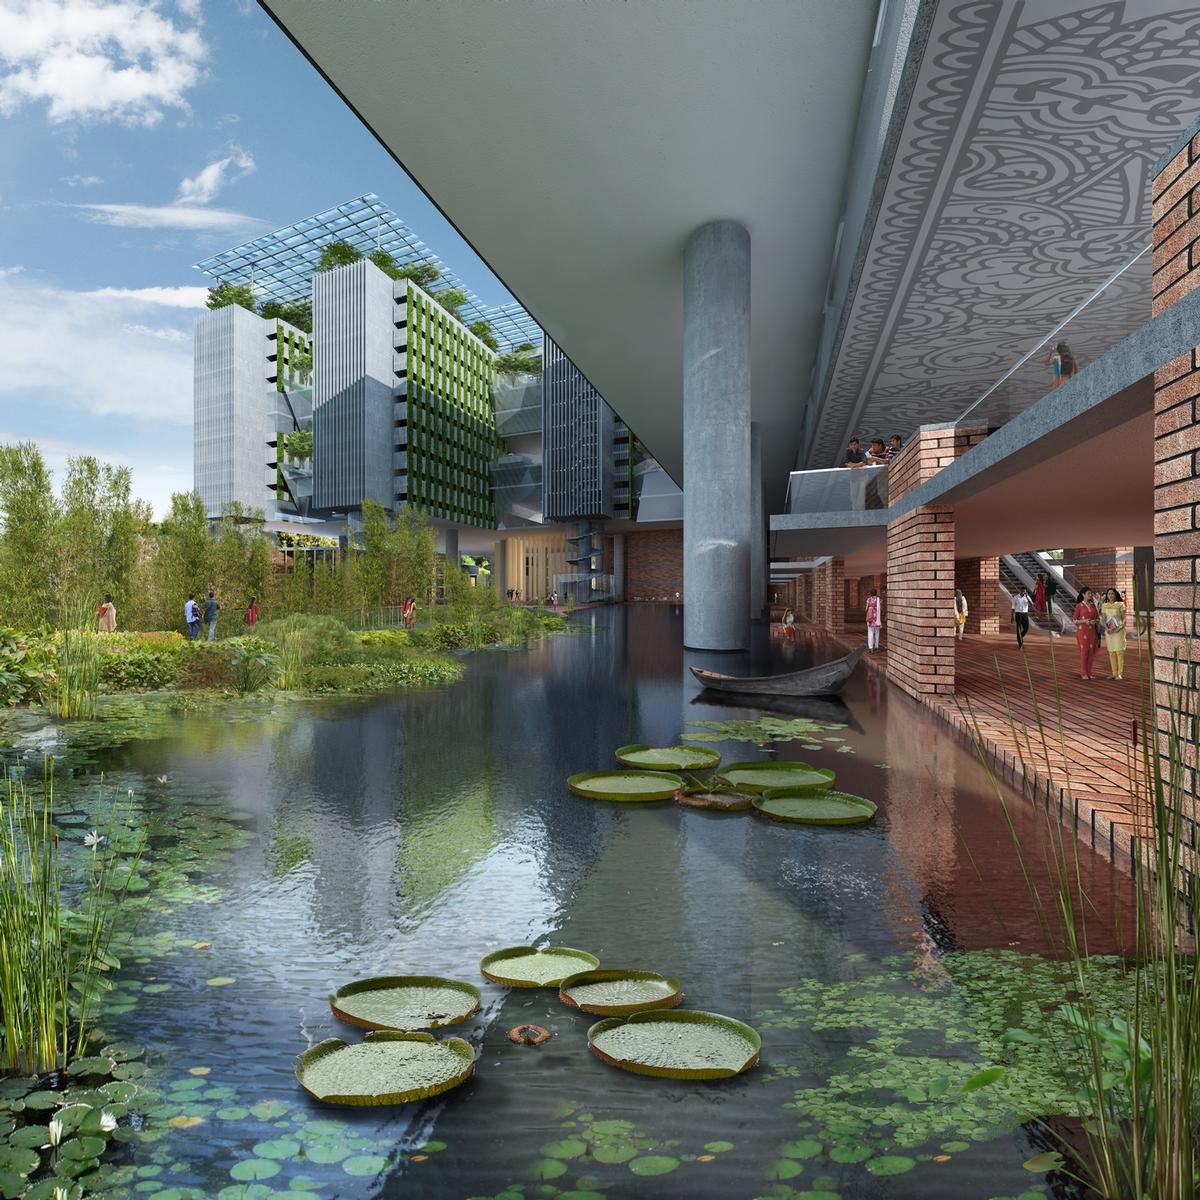 The park is designed to be a tropical oasis set on a lake and surrounded by bamboo / Obilia